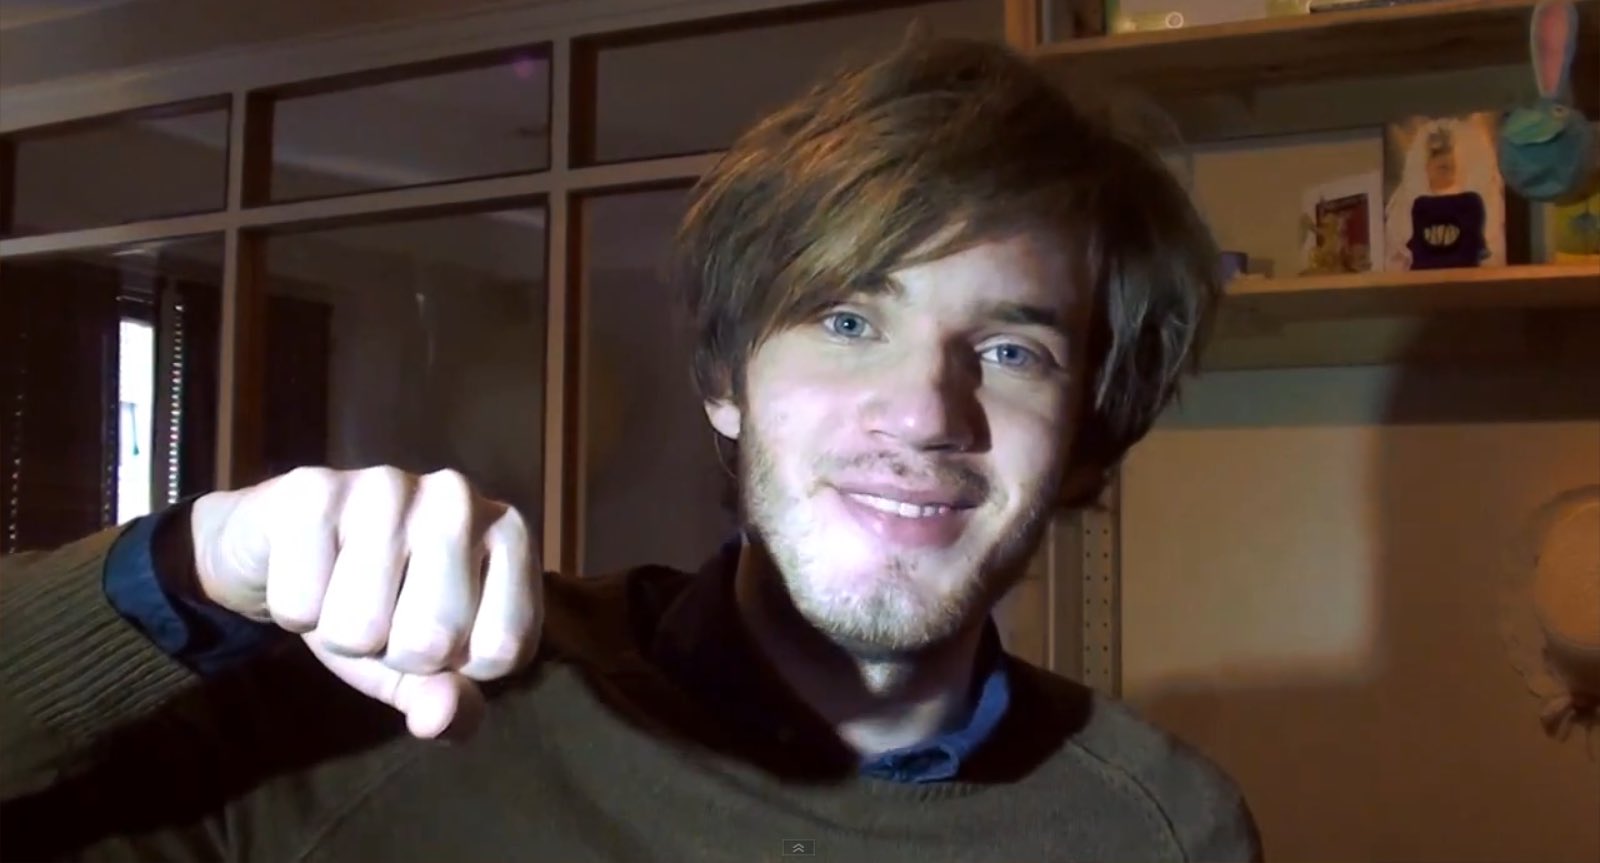 “Pewdiepie is dead and was replaced by a look alike: a conspiracy theory” .